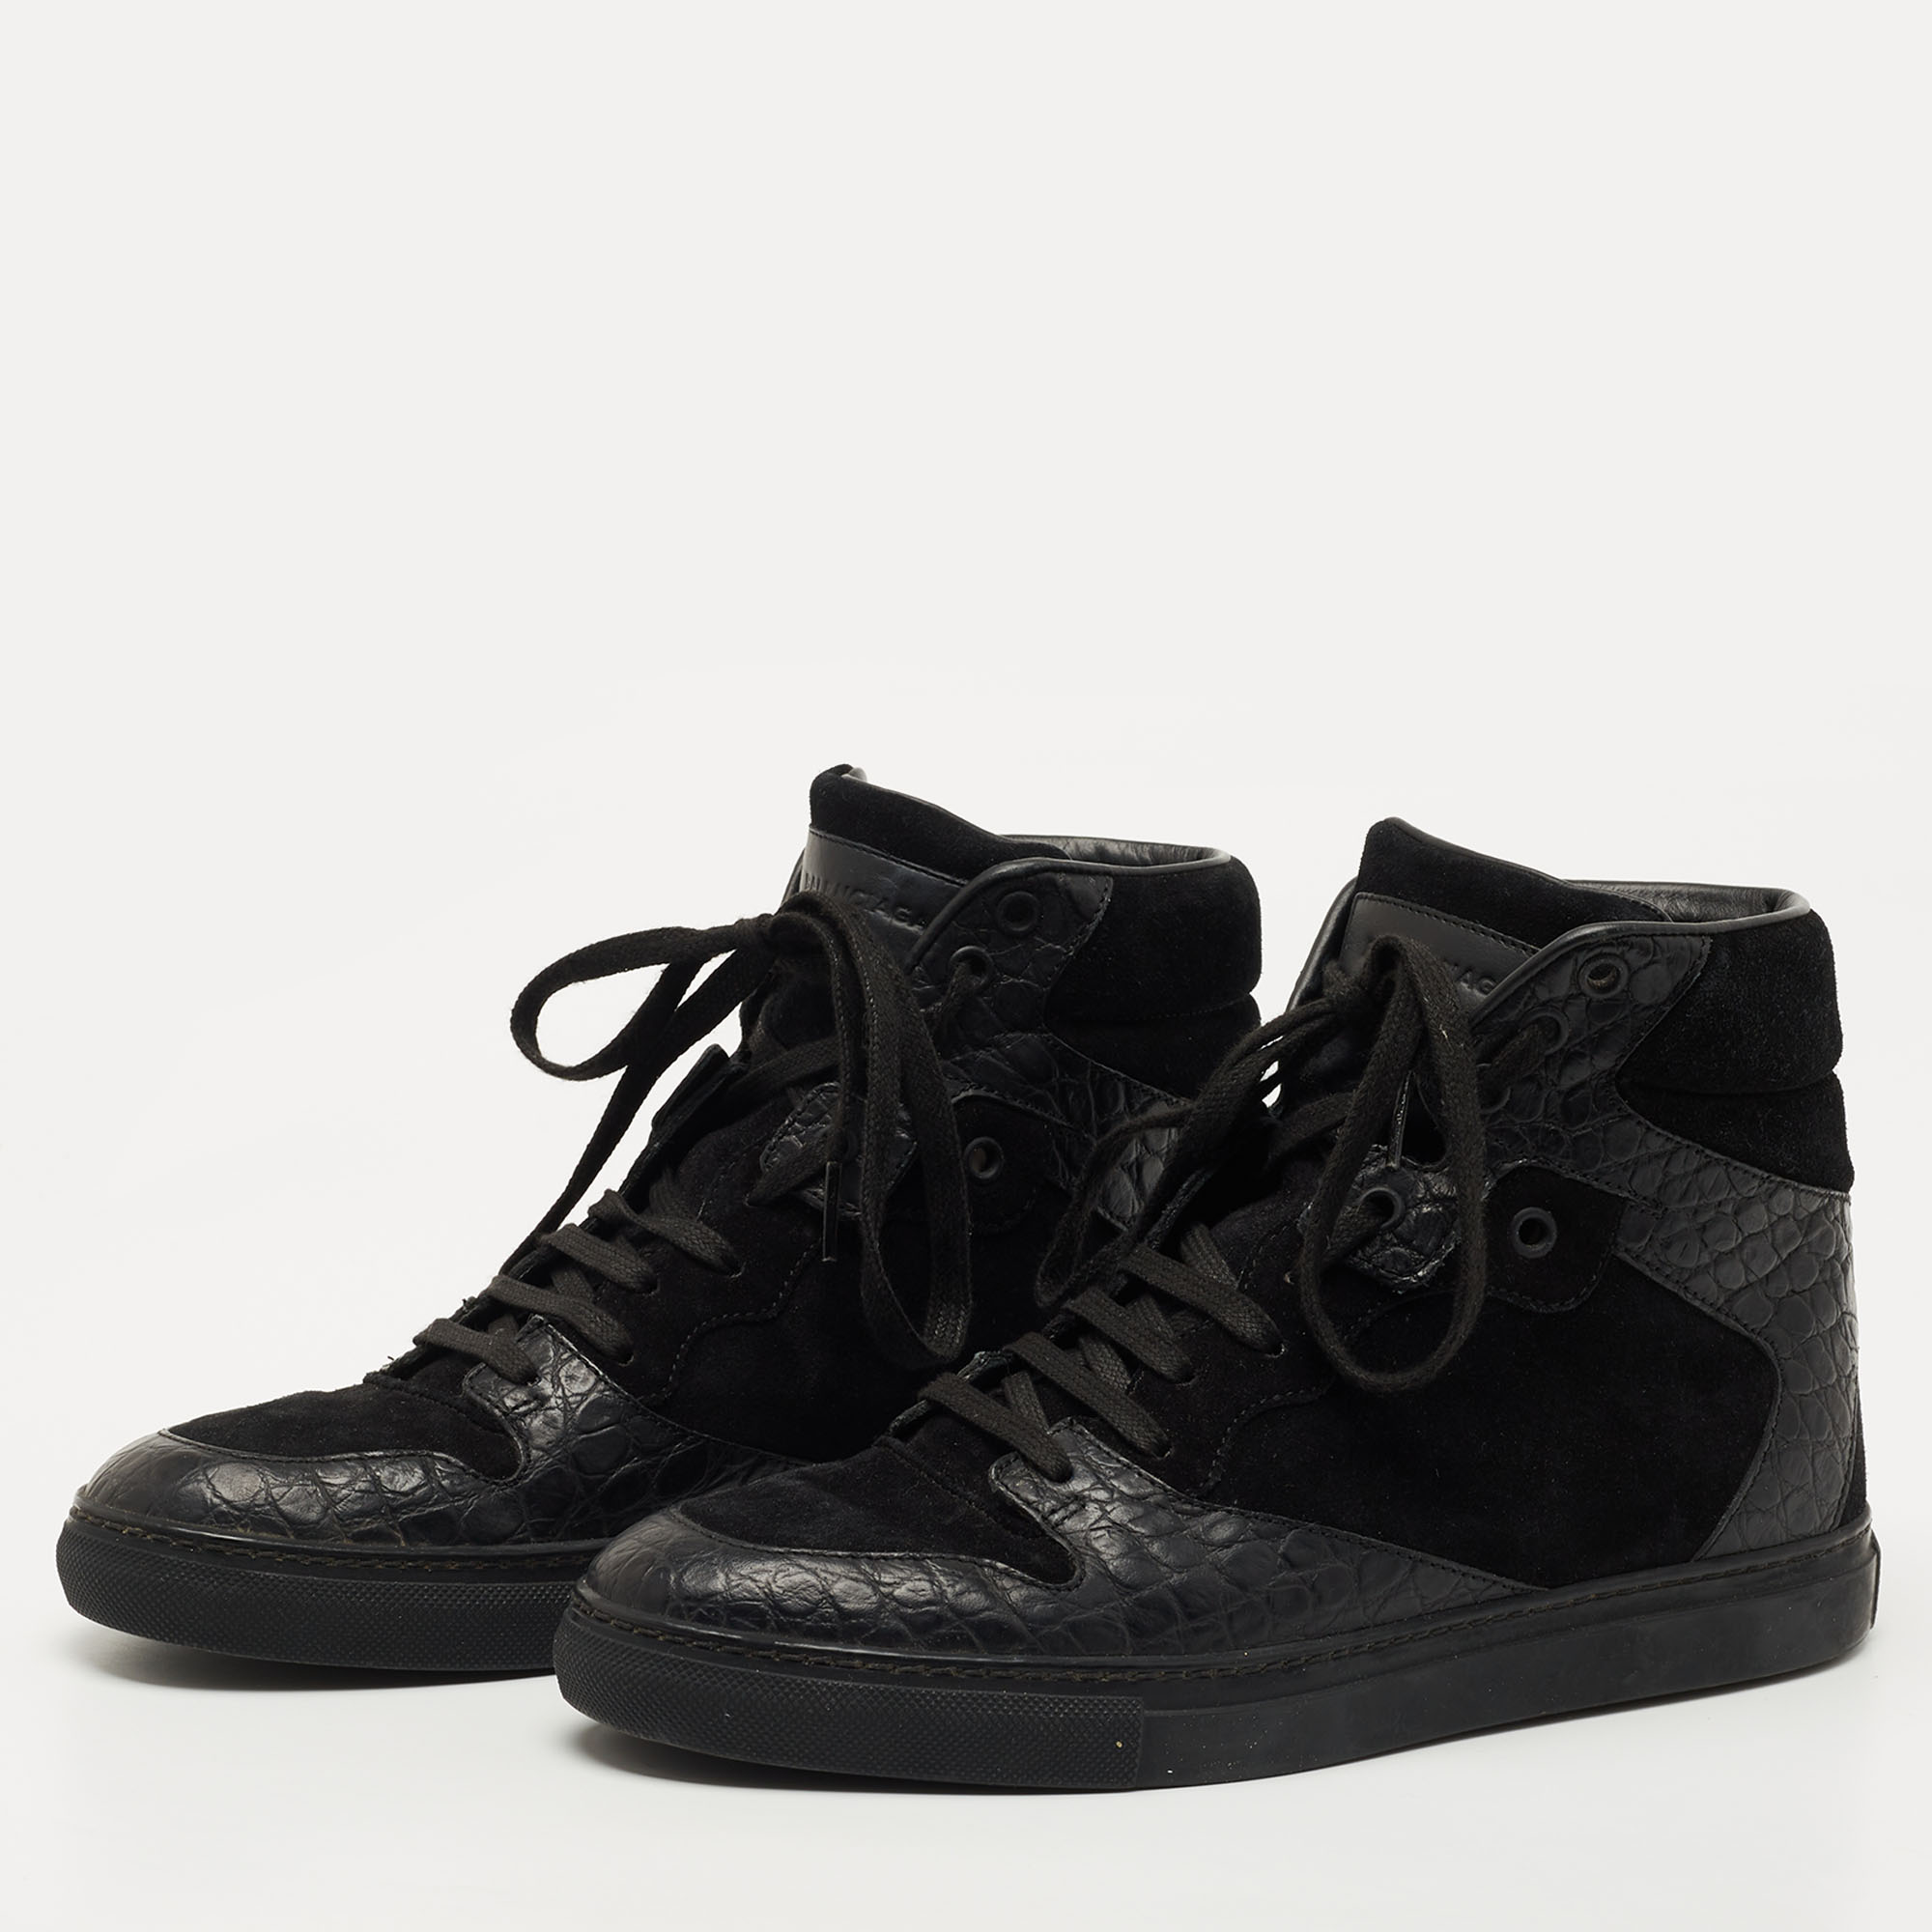 

Balenciaga Black Croc Embossed Leather and Suede High Top Sneakers Size